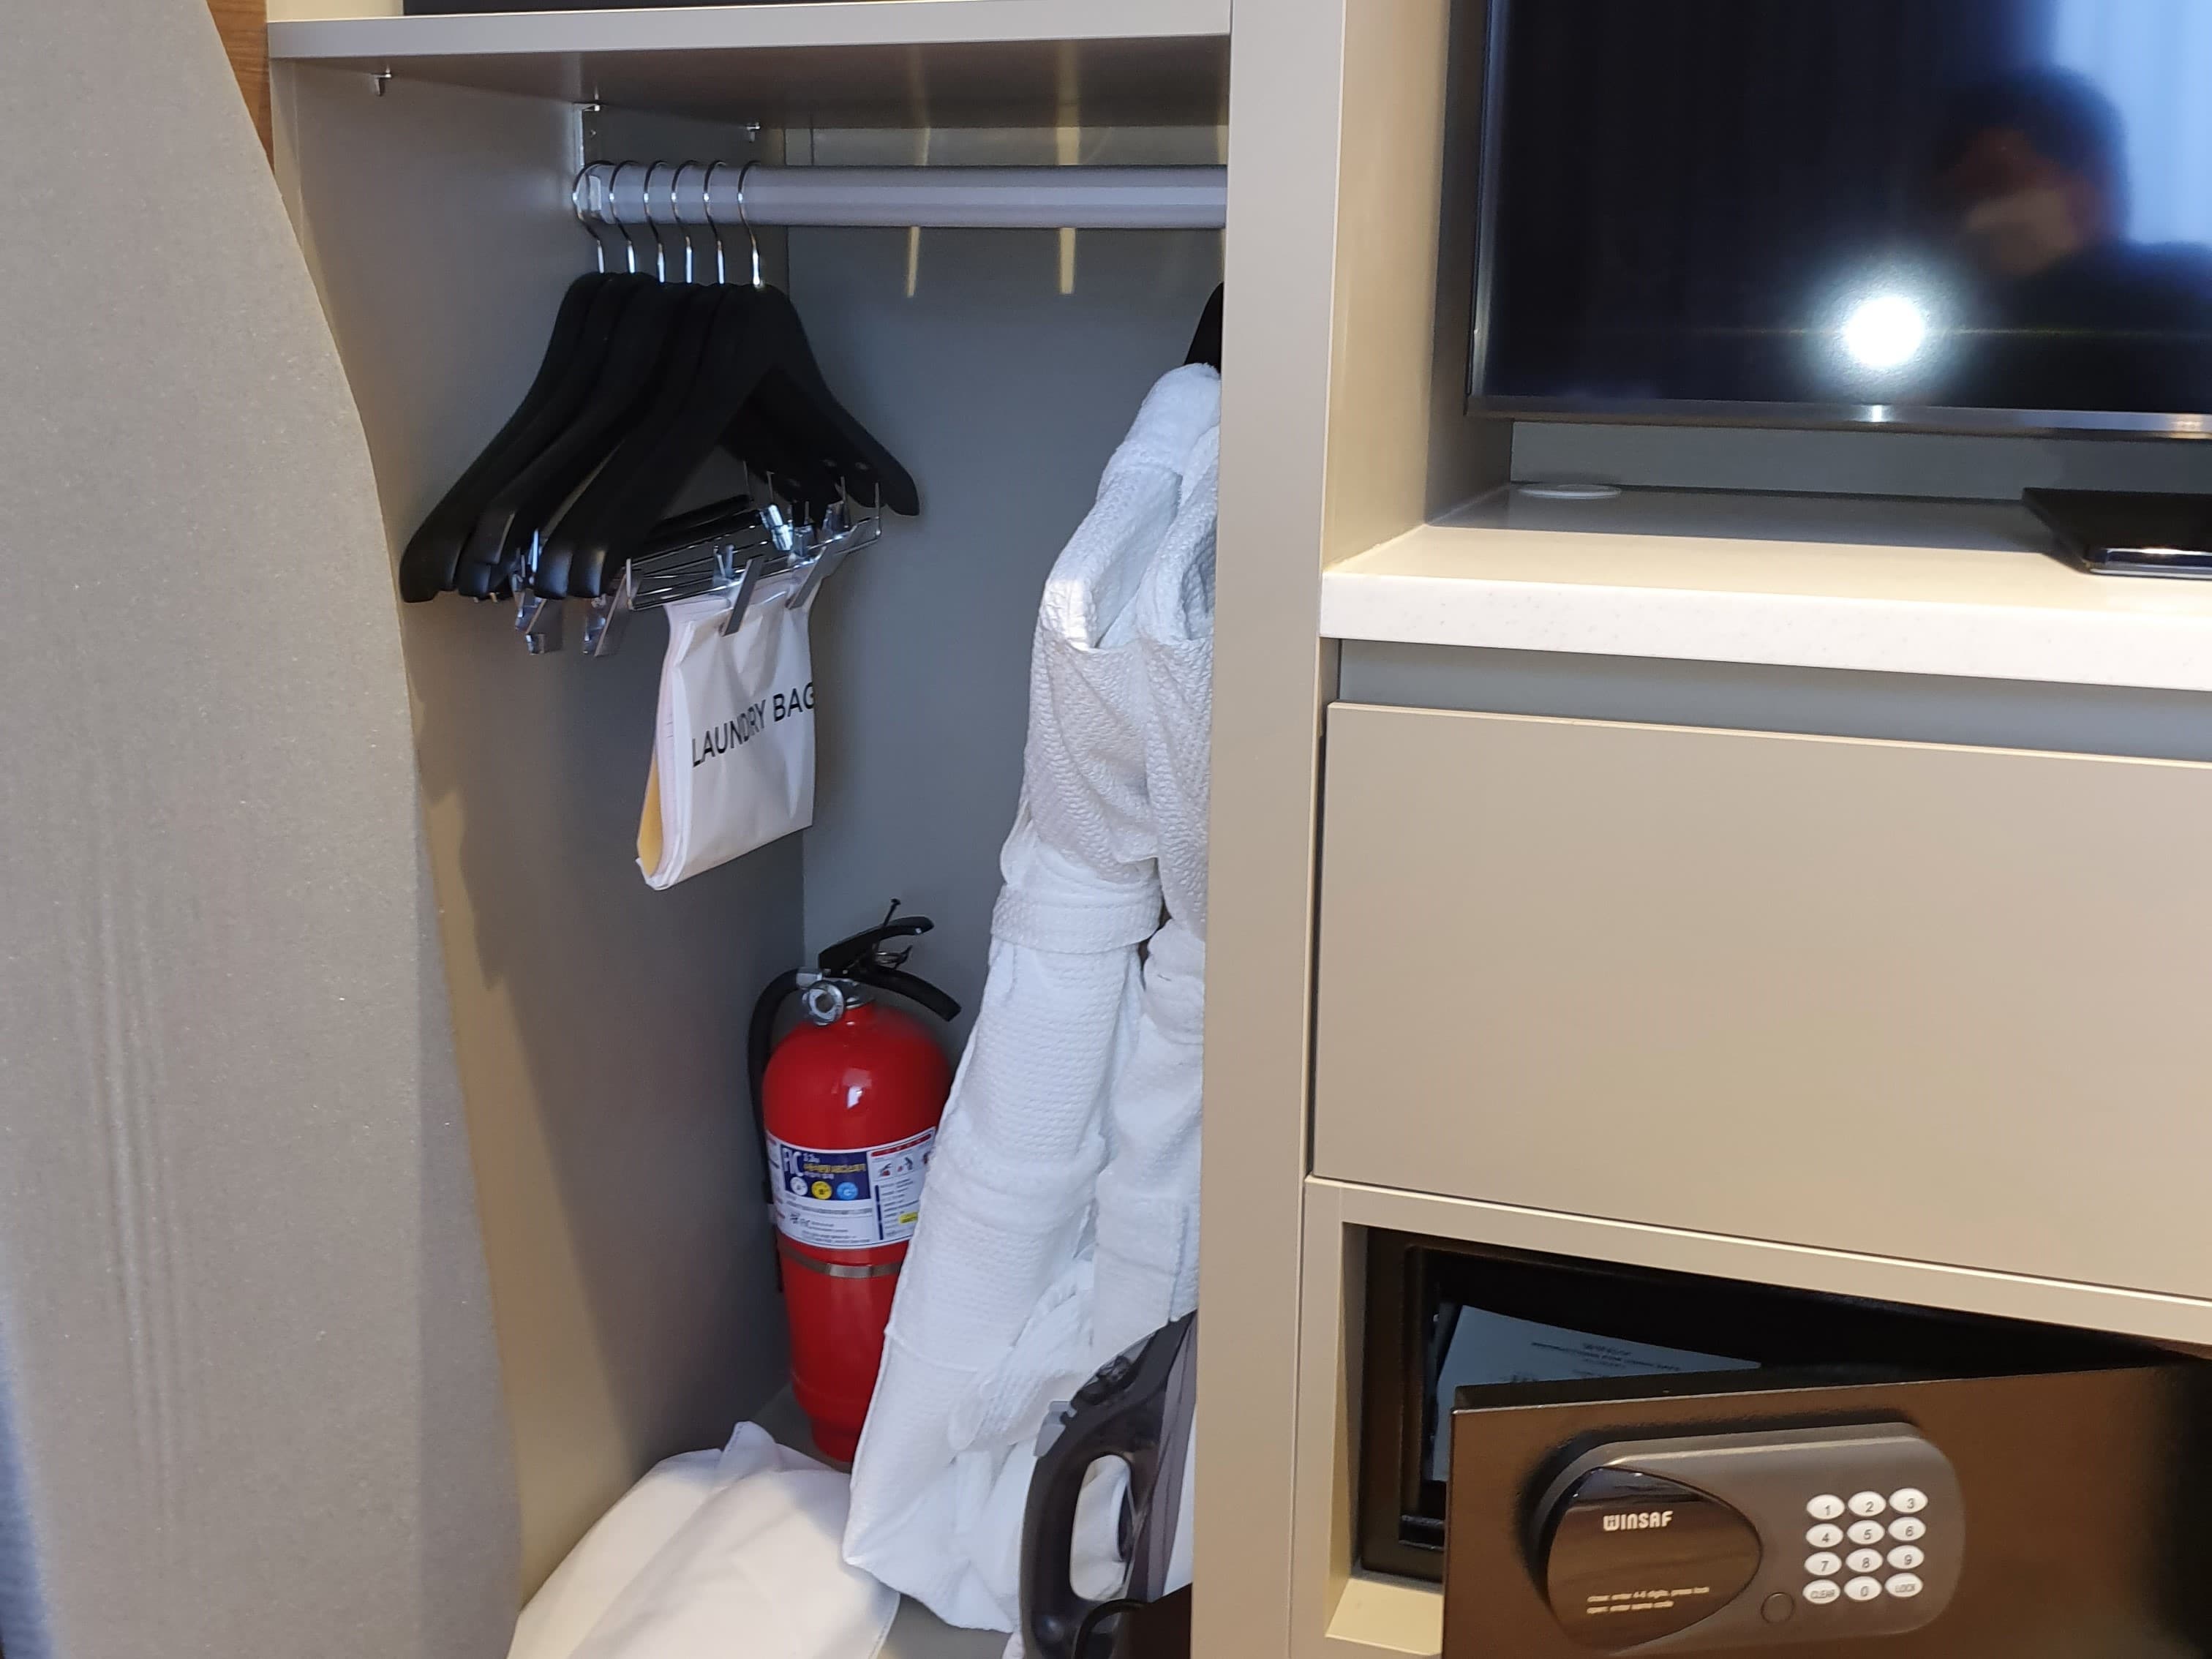 Accessible guestroom0 : Built-in closet in the hotel room